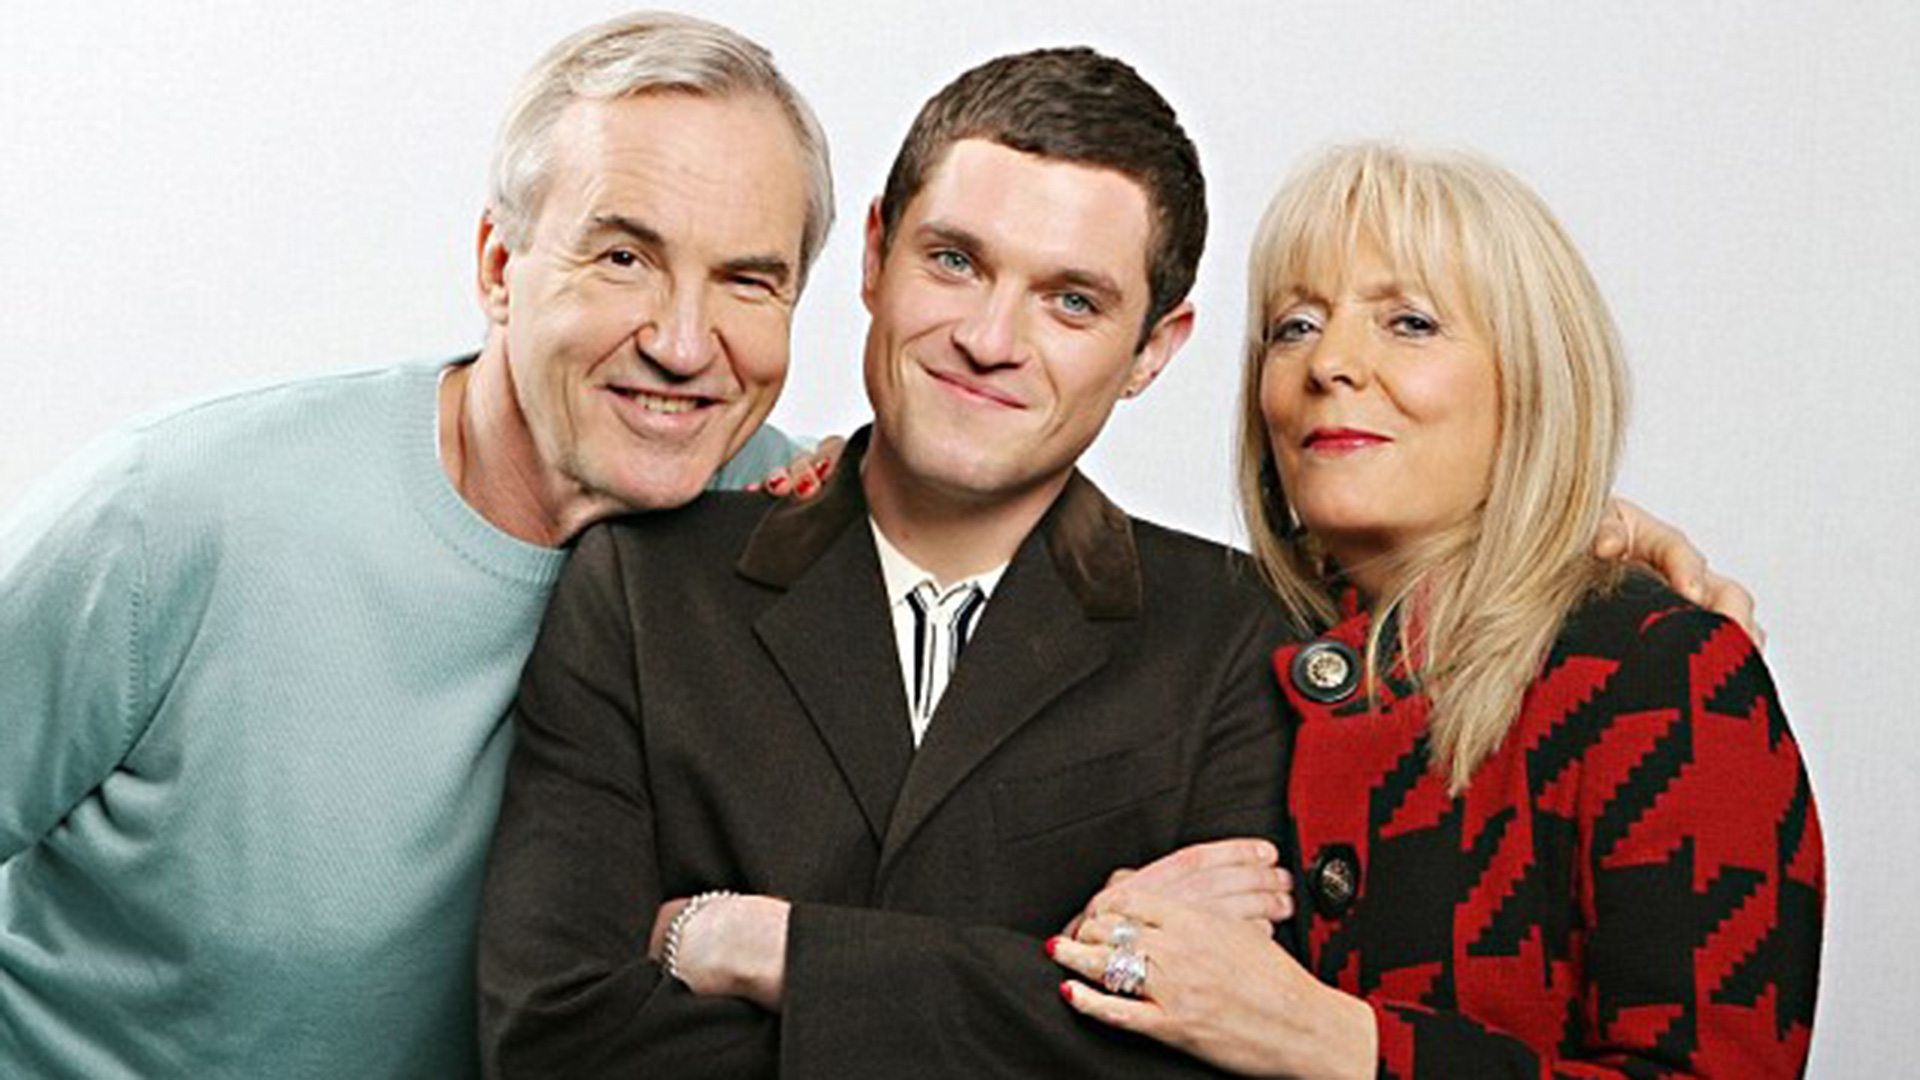 Gavin & Stacey Wallpapers